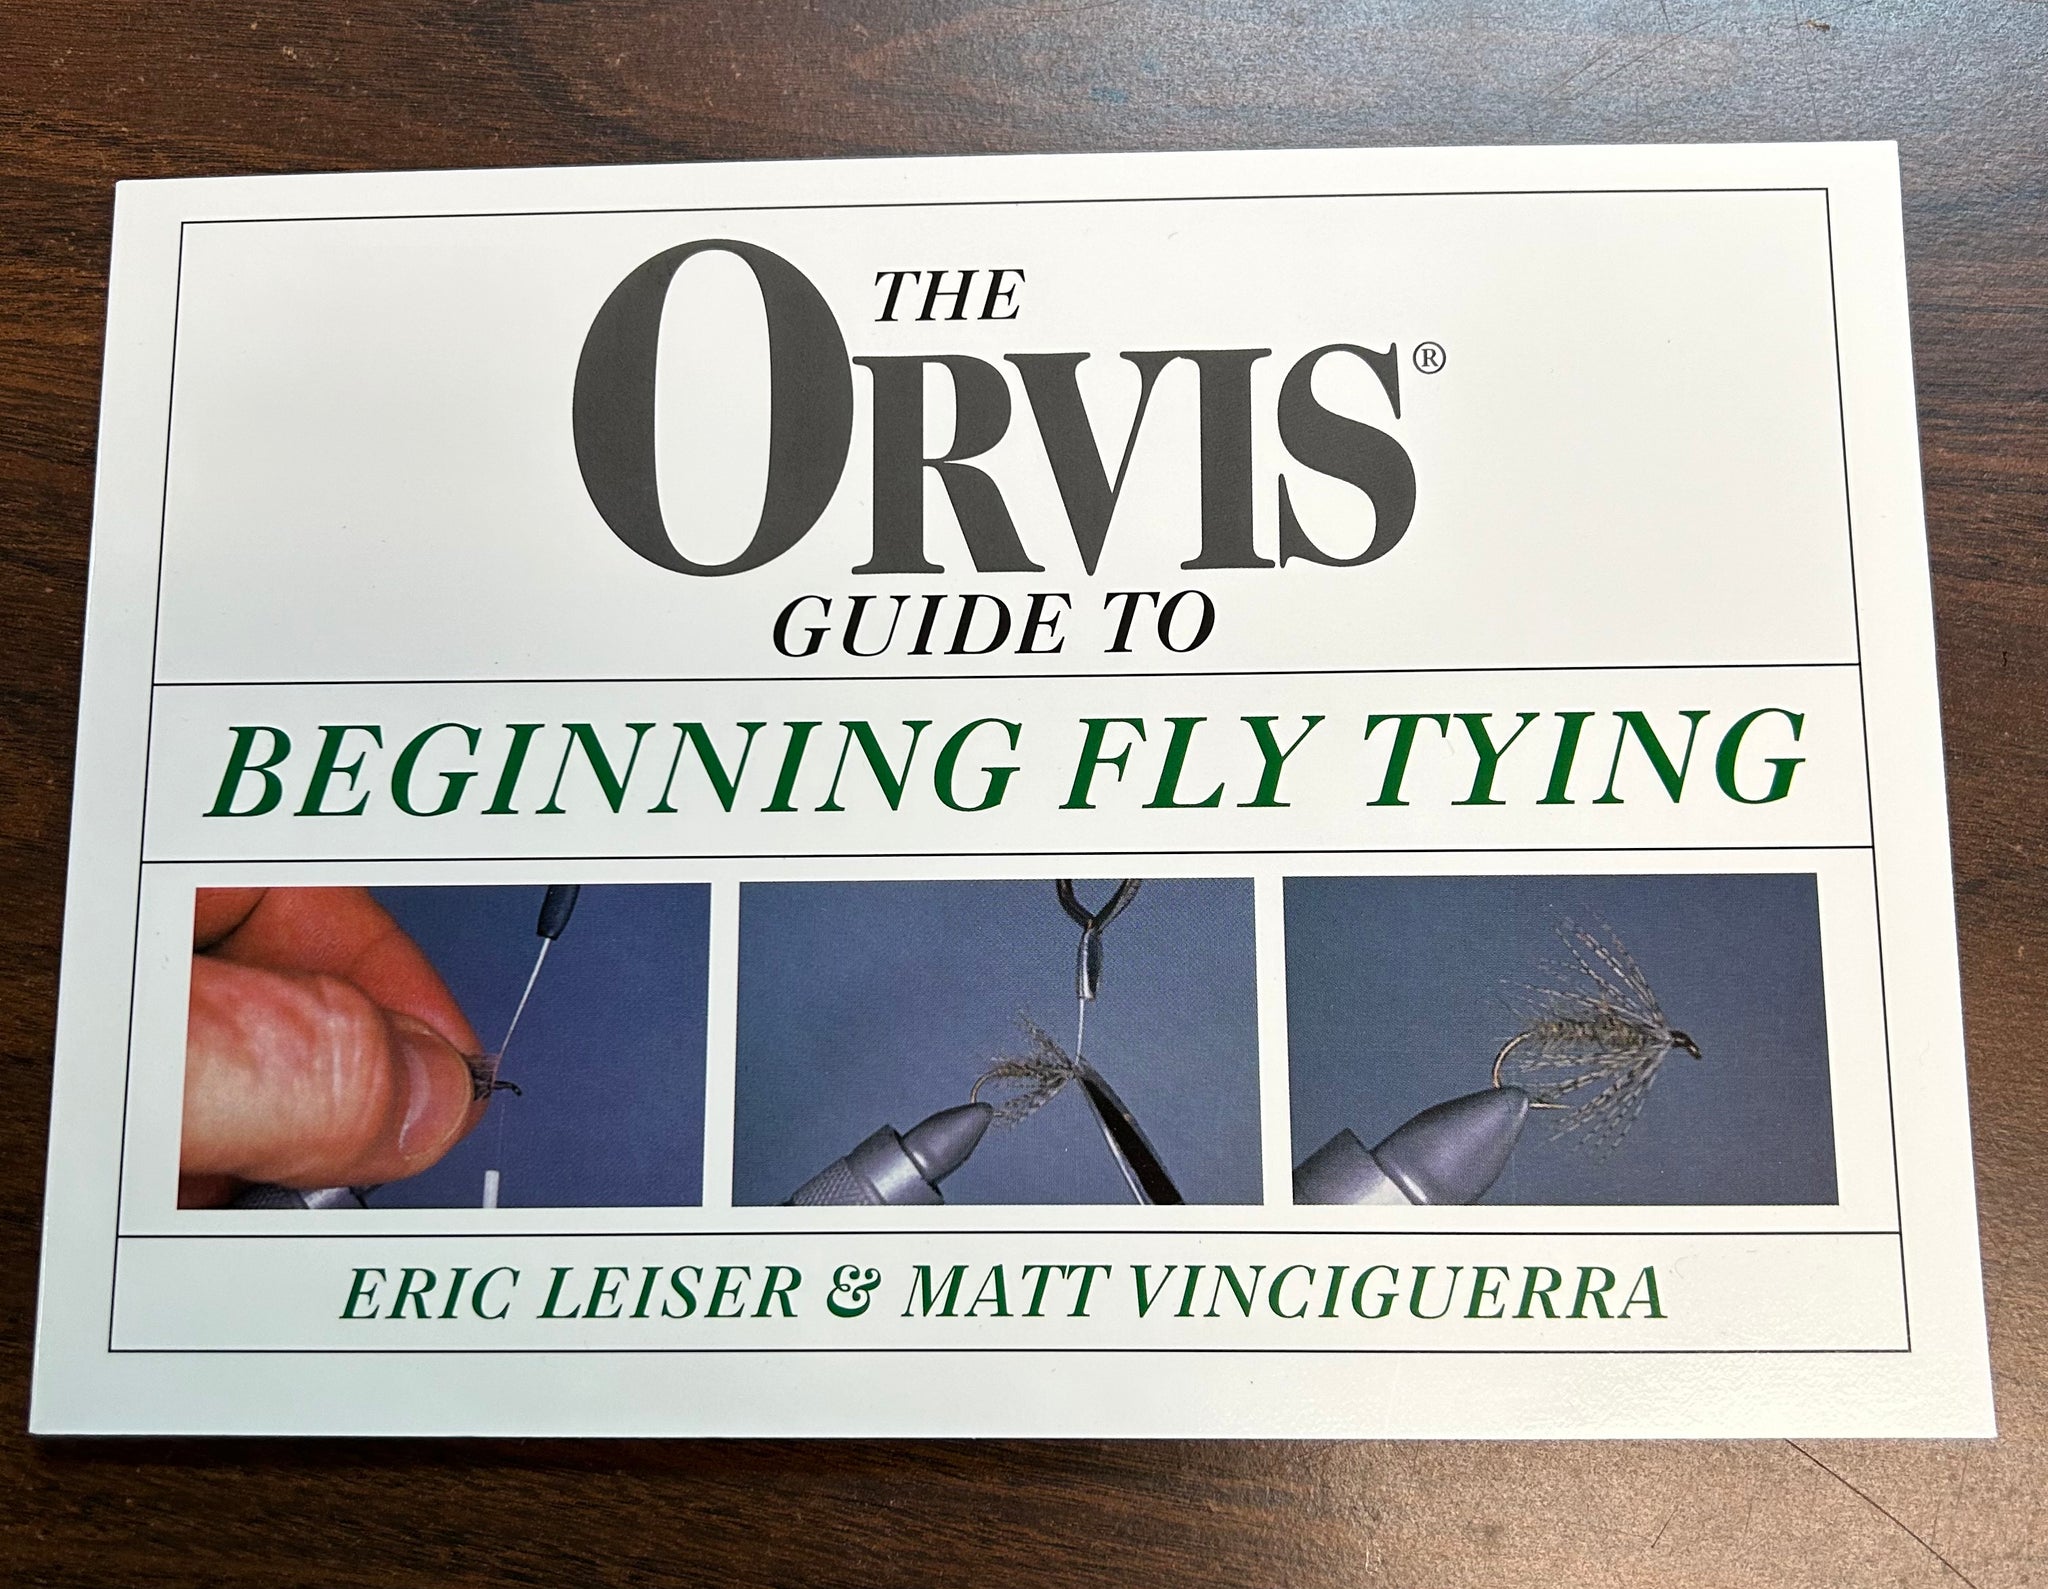 The Orvis Guide to Beginning Fly Tying